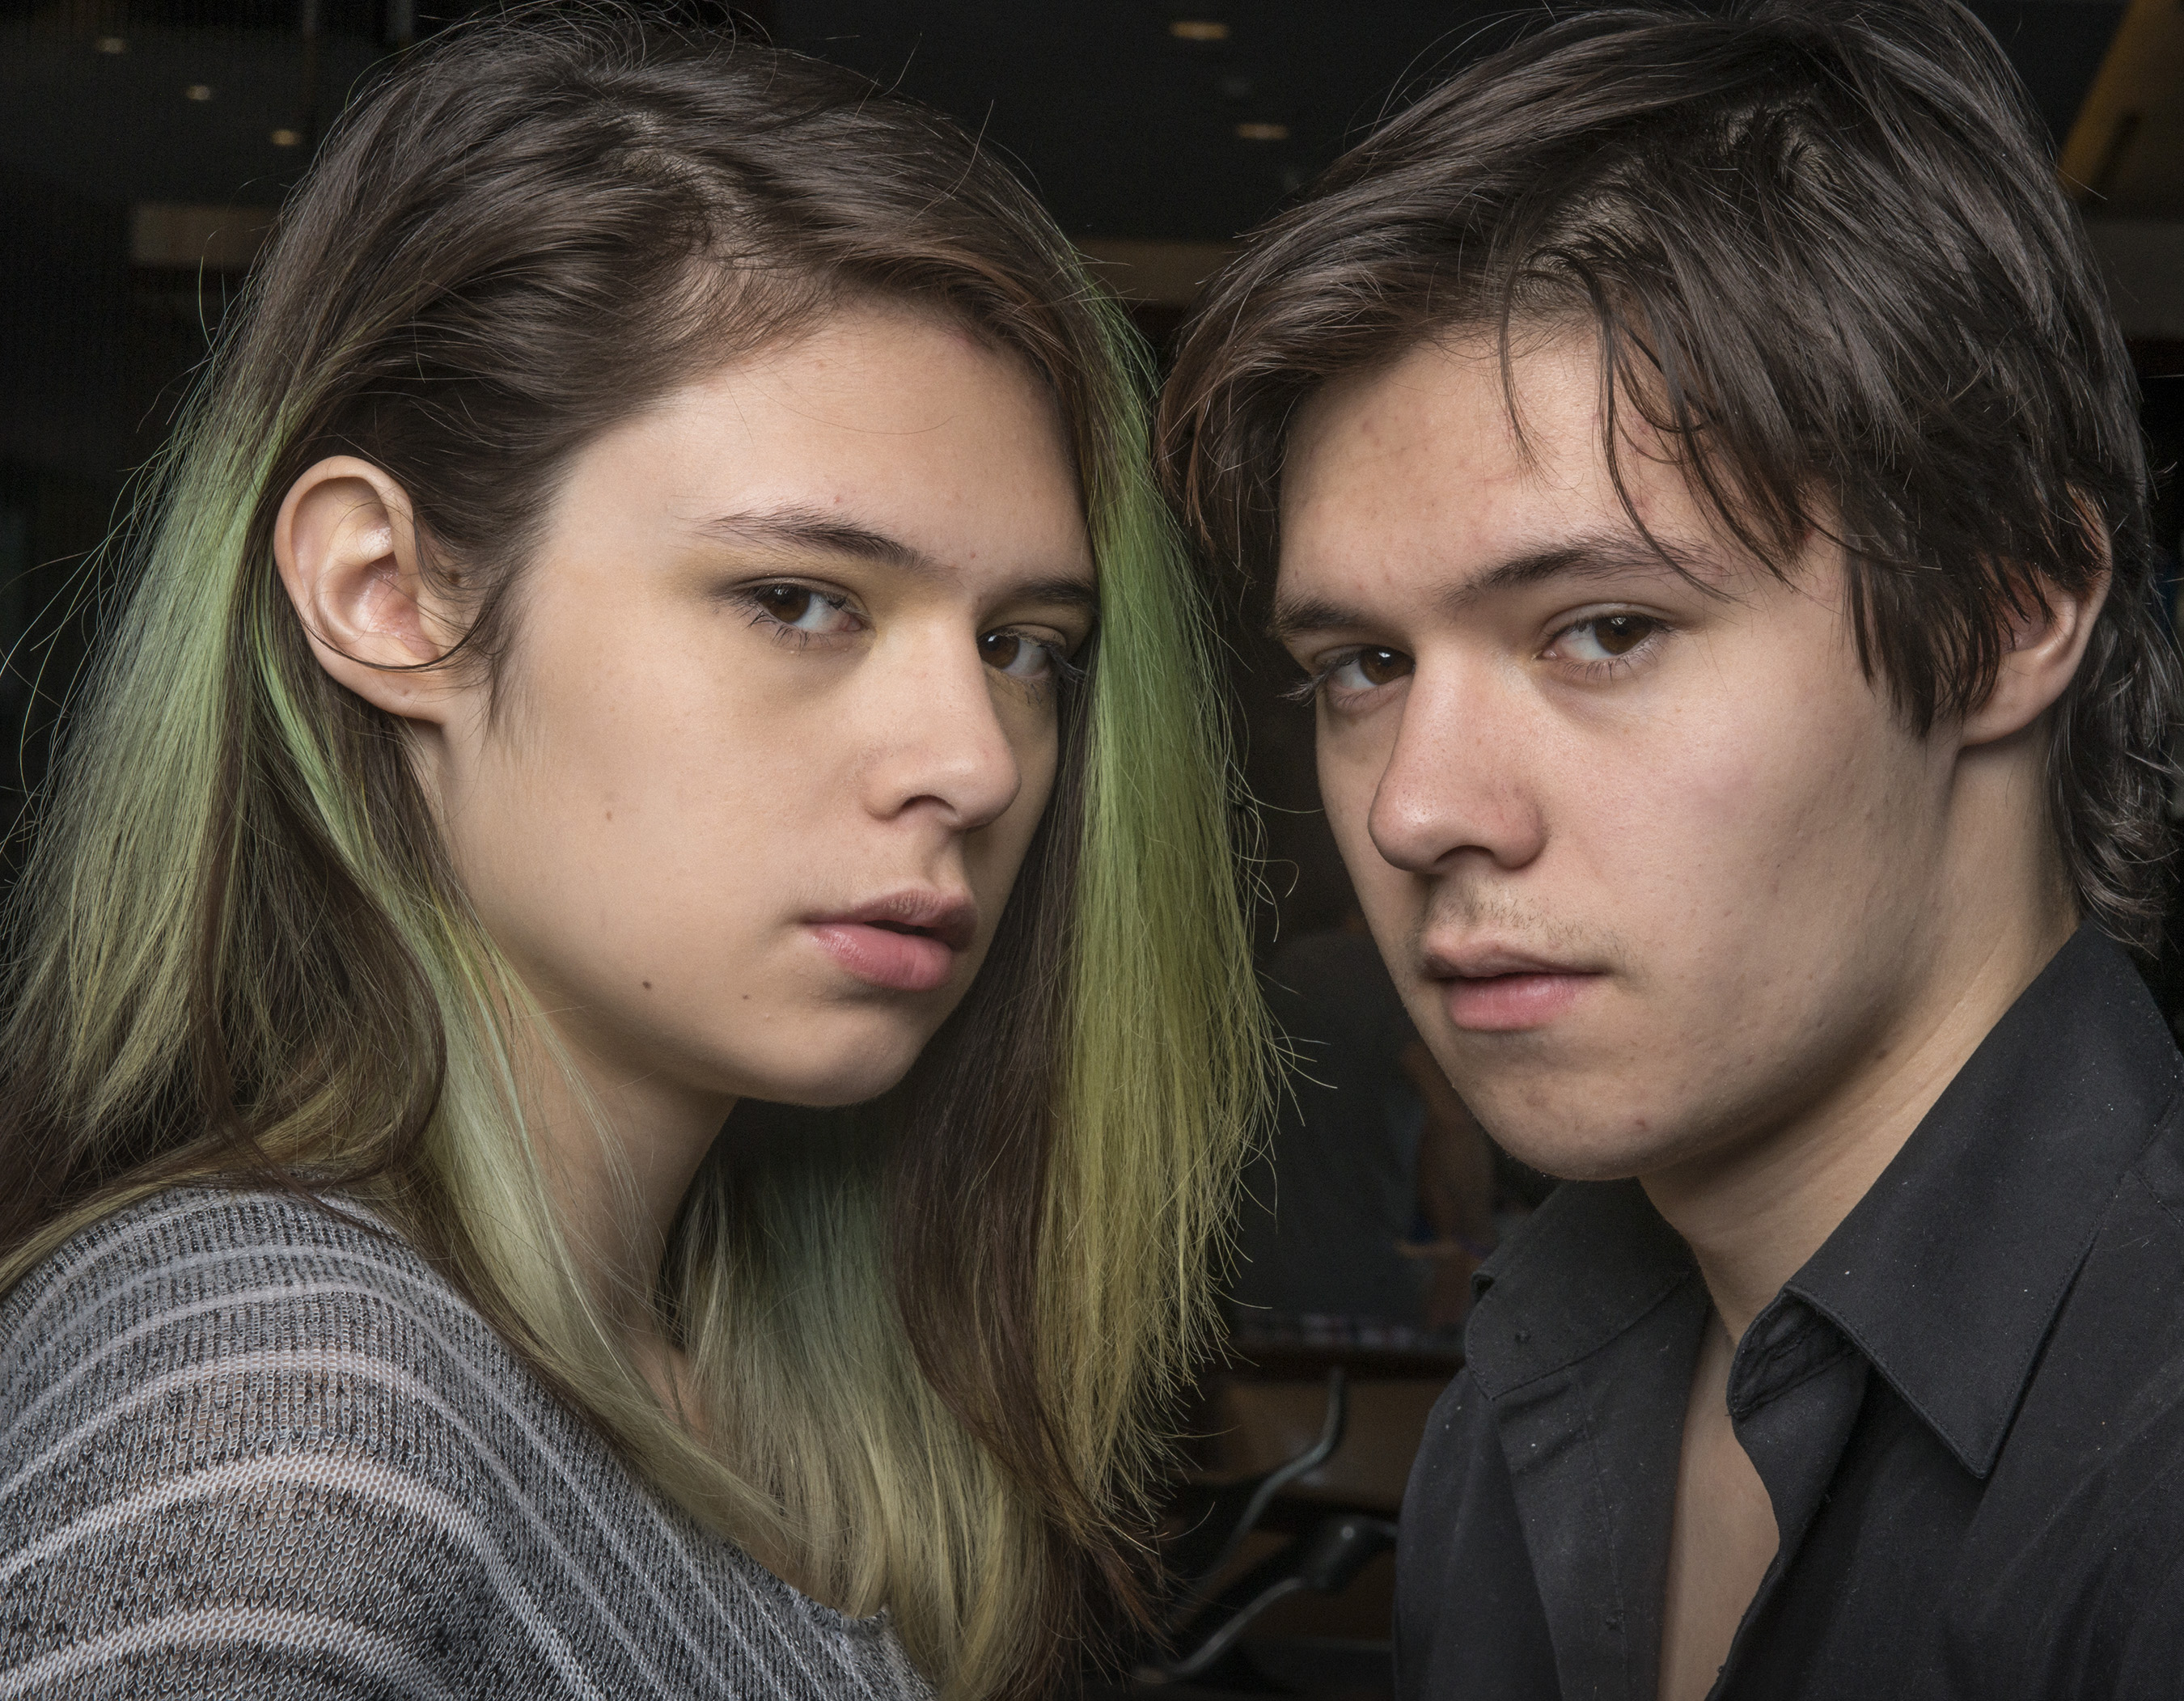 Jonas, right, and Nicole Maines, both 18, in Denver, CO, on Oct. 10, 2015. (Bill O'Leary—The Washington Post/Getty Images)